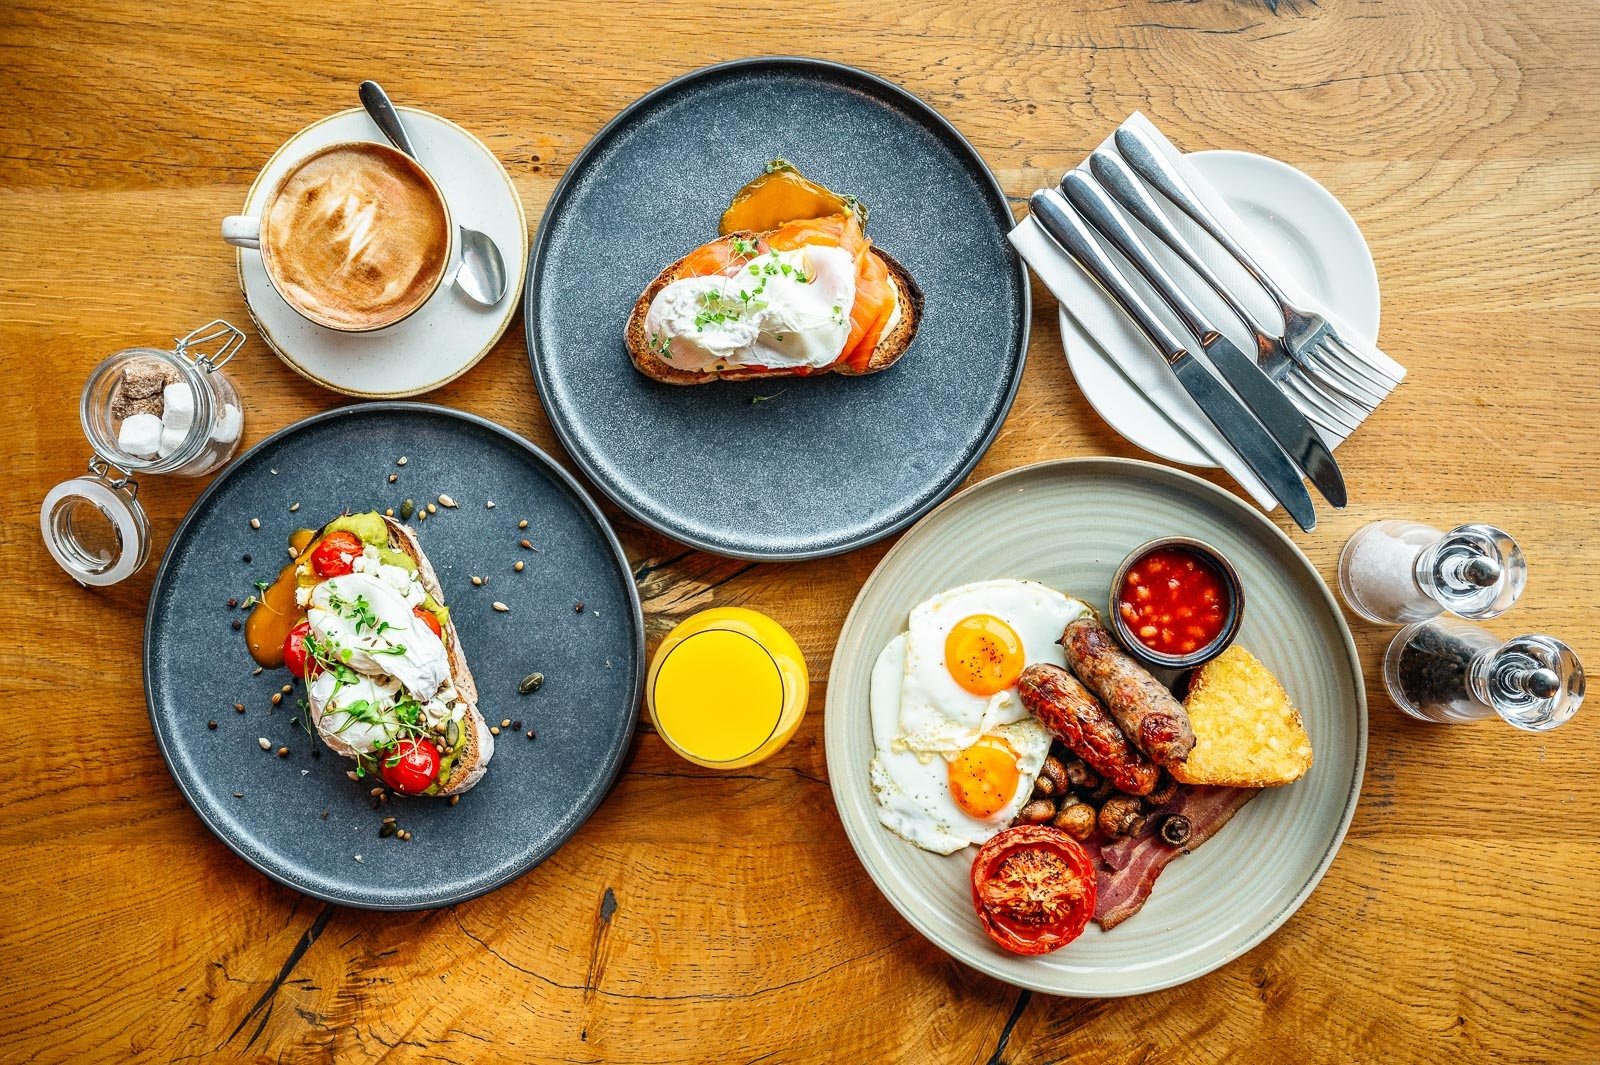 A reminder that this weekend sees the return of The Royal Breakfast Club👑🌳

Saturday 13th April | 9am to 11.30am | Including our new breakfast package including filter coffee, tea, juice, and cooked breakfast for &pound;18.

Bookings and more infor